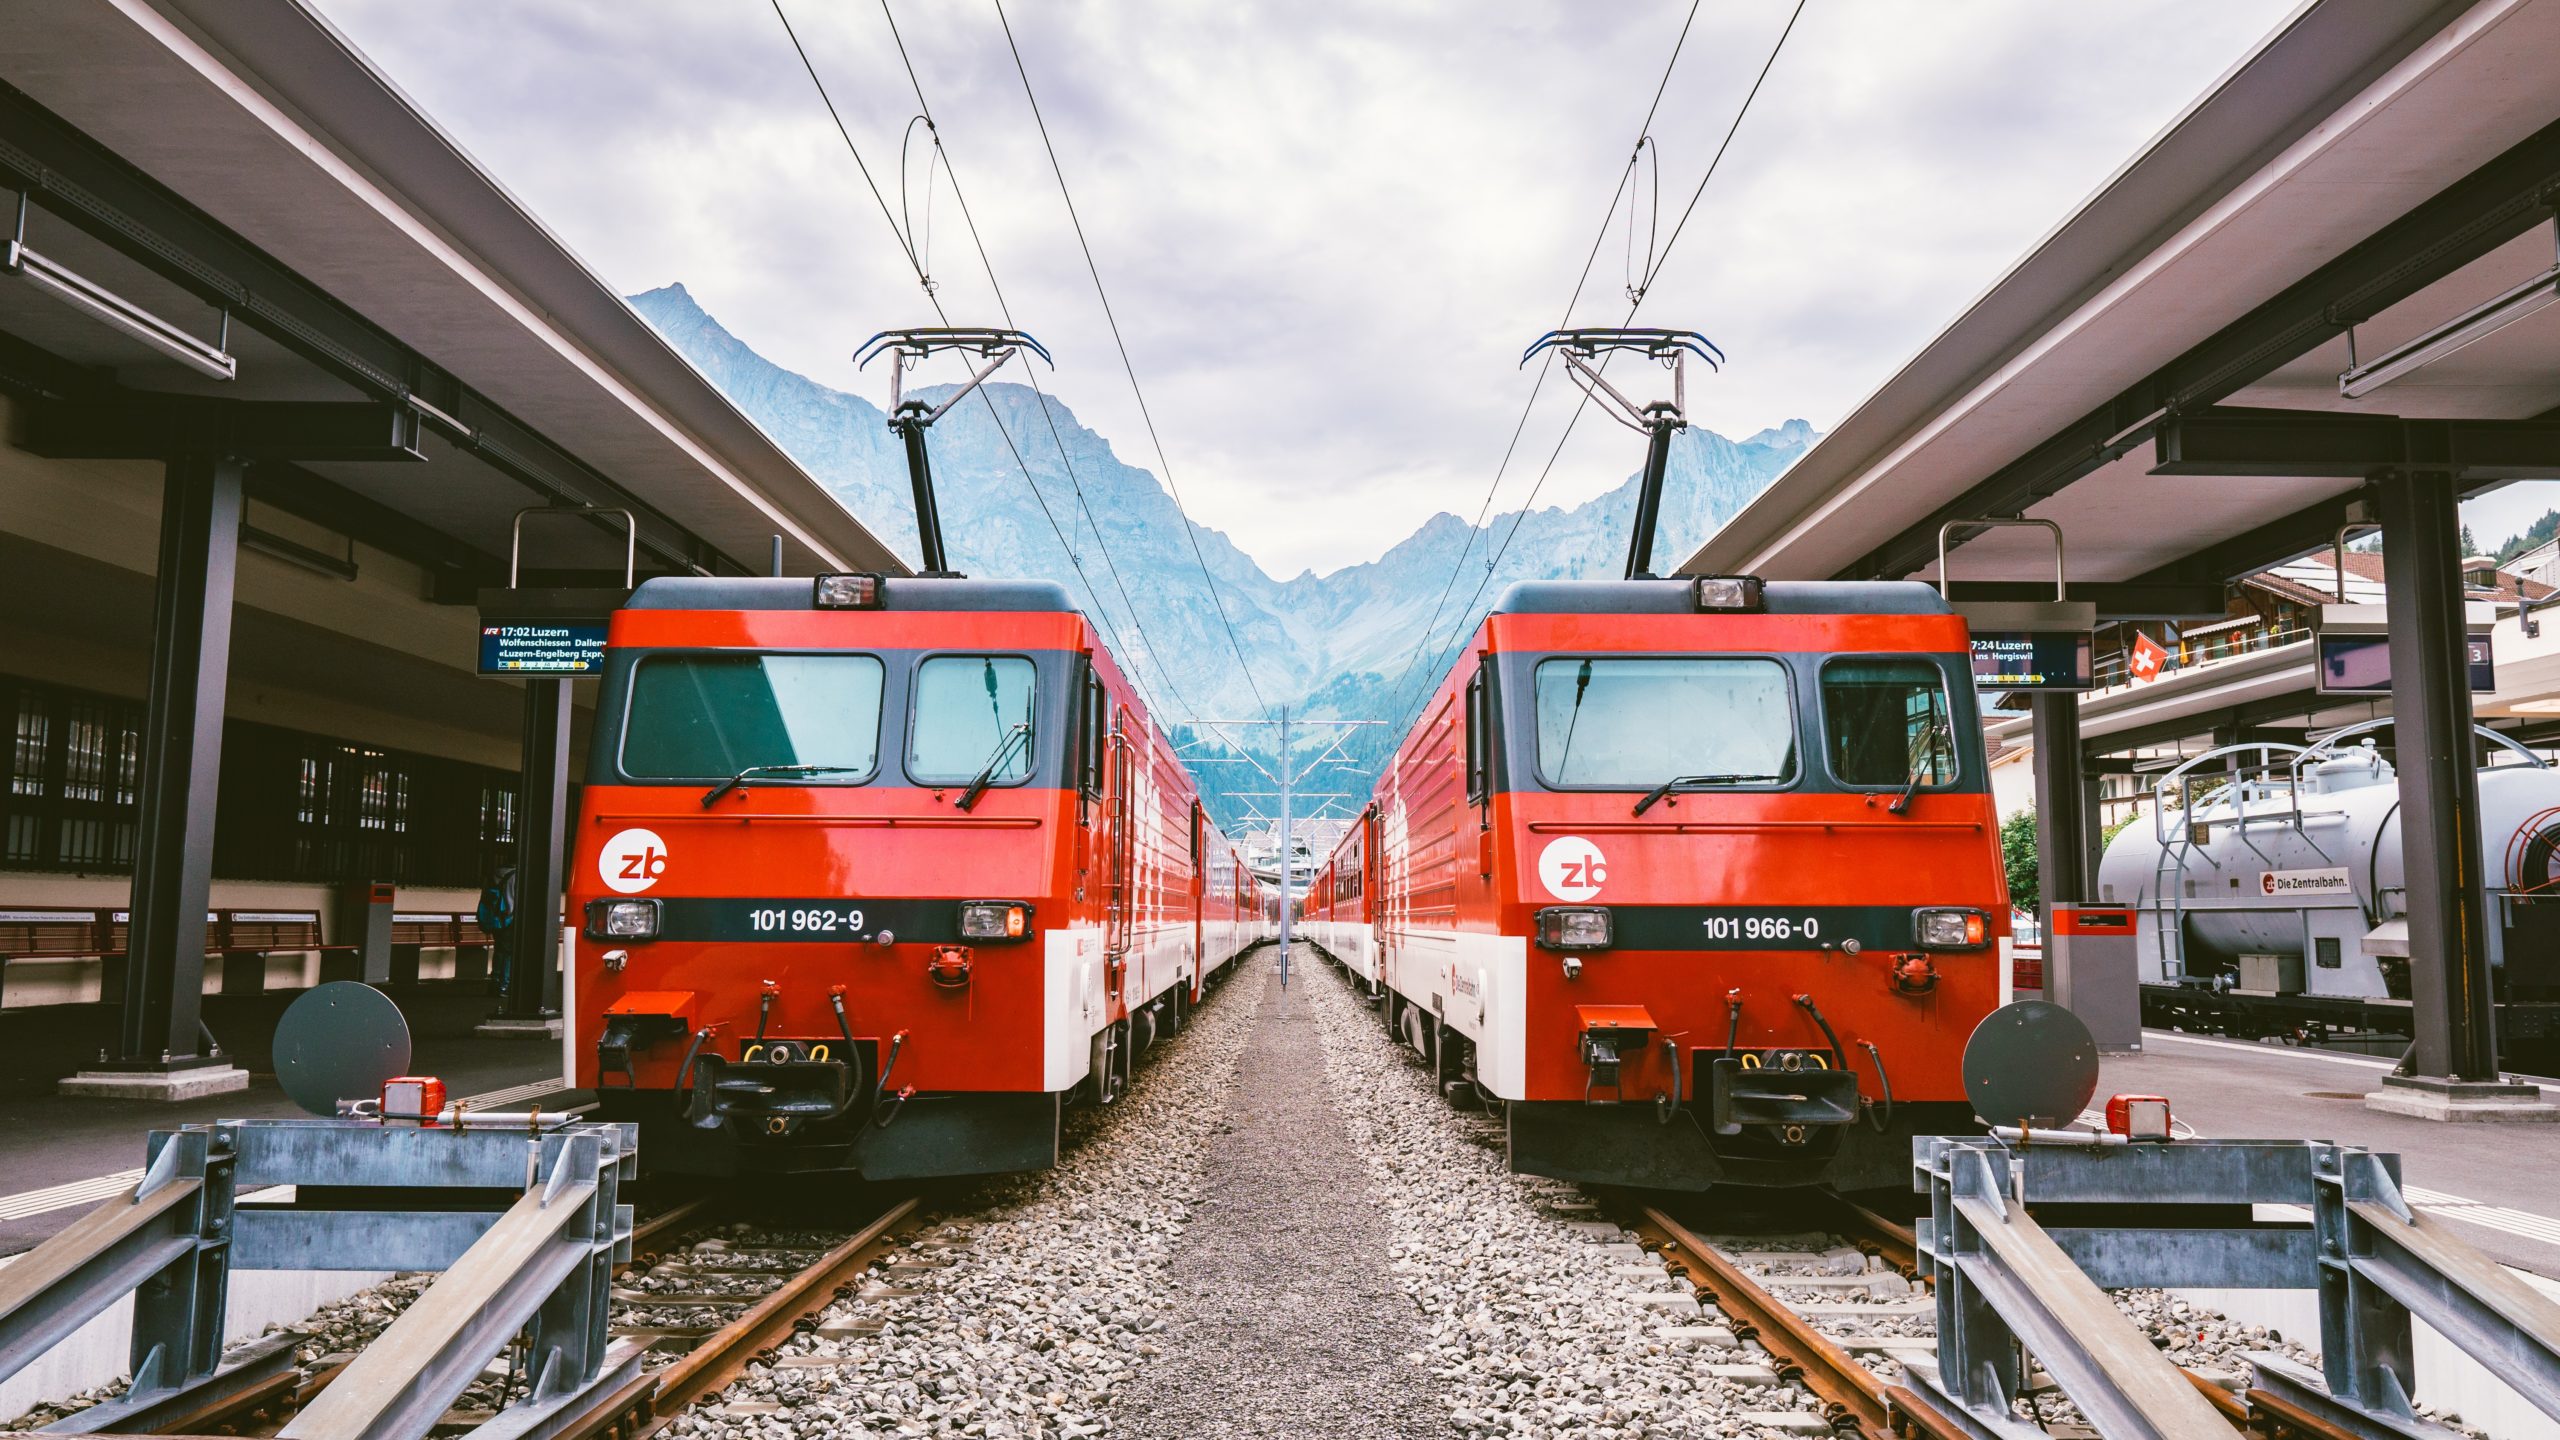 https://www.drainbot.at/wp-content/uploads/2020/04/photo-of-two-red-trains-2031758-scaled.jpg